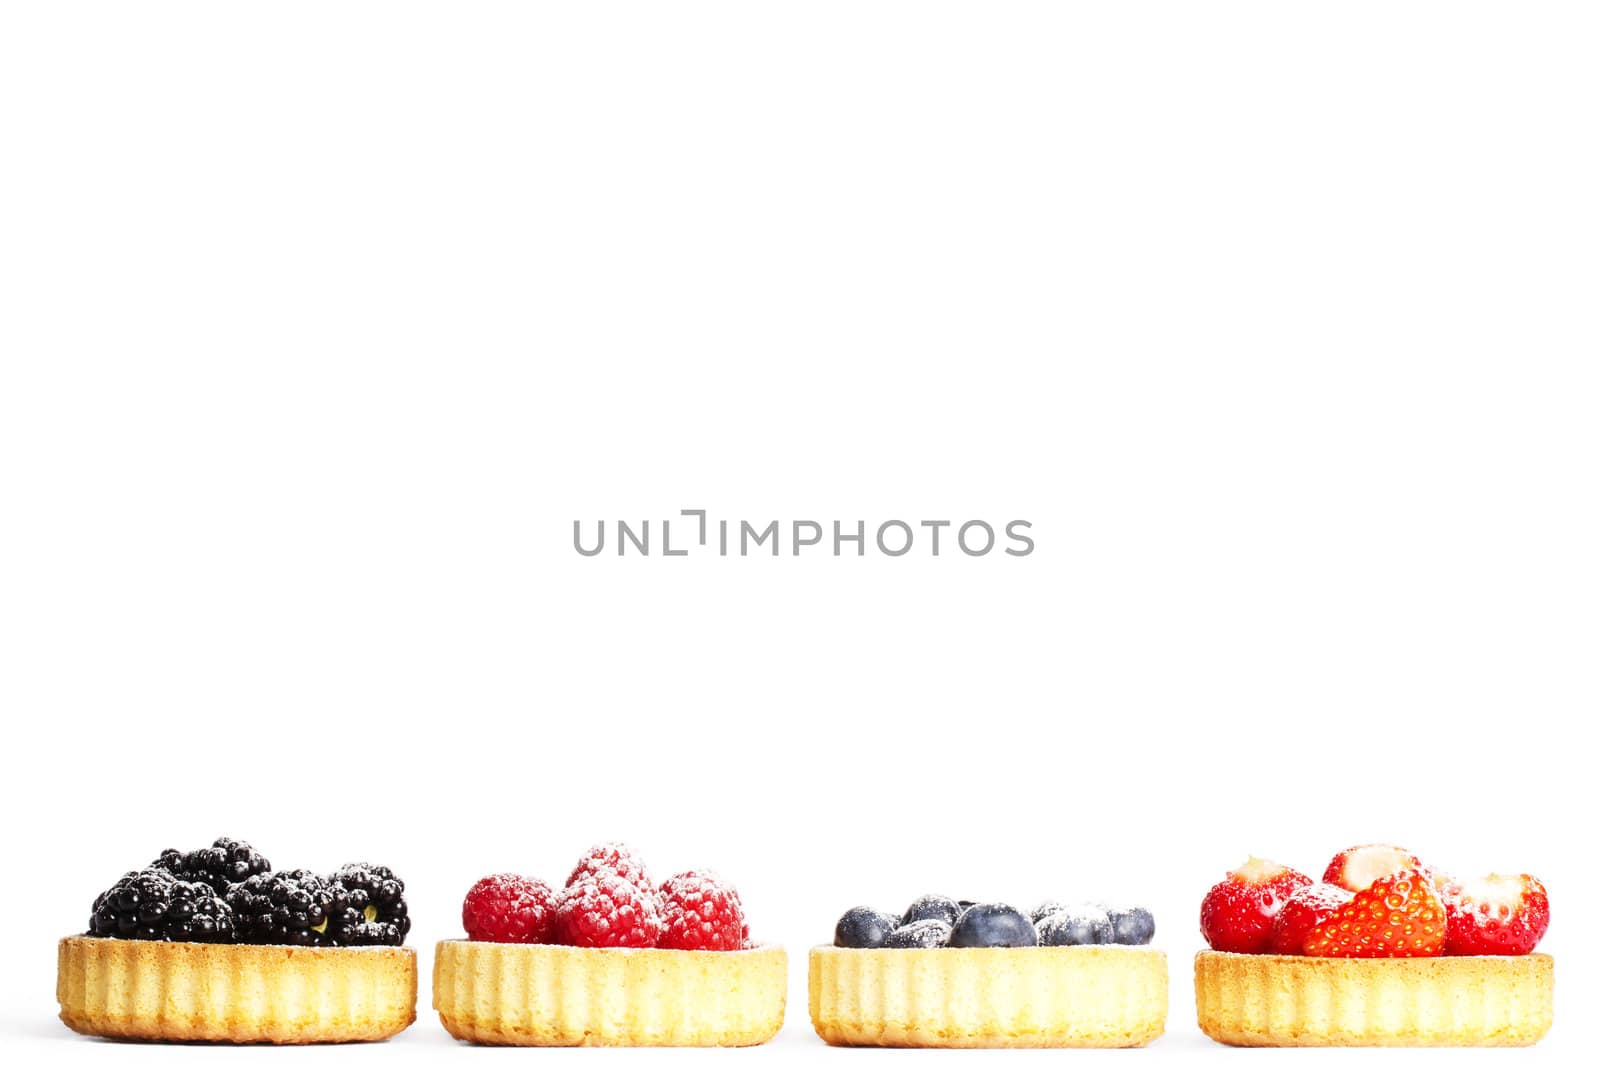 row of tartlets with sugar covered wild berries on white background